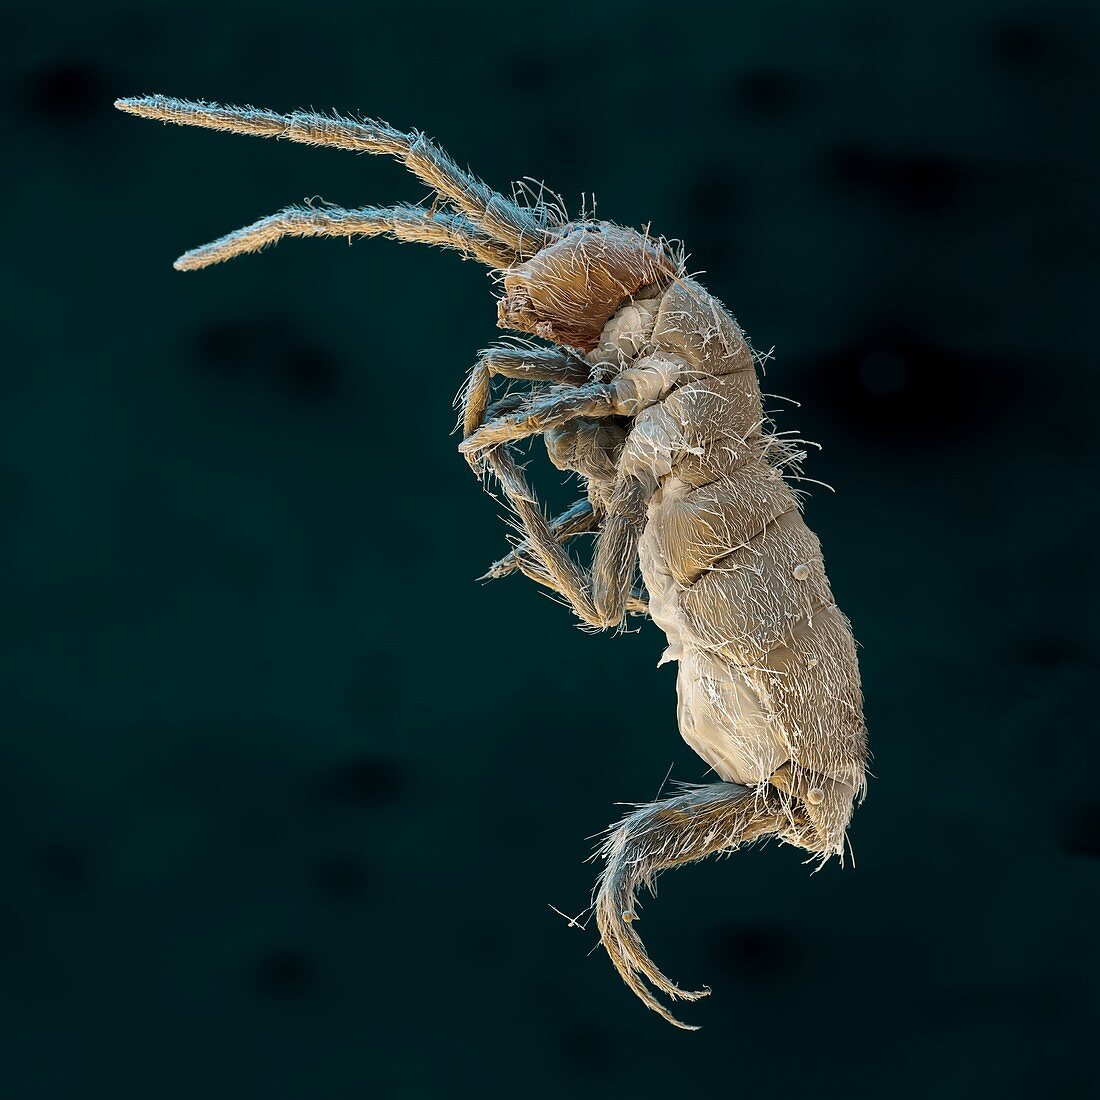 Collembola 40x - Collembola, Springschwanz, 40-1